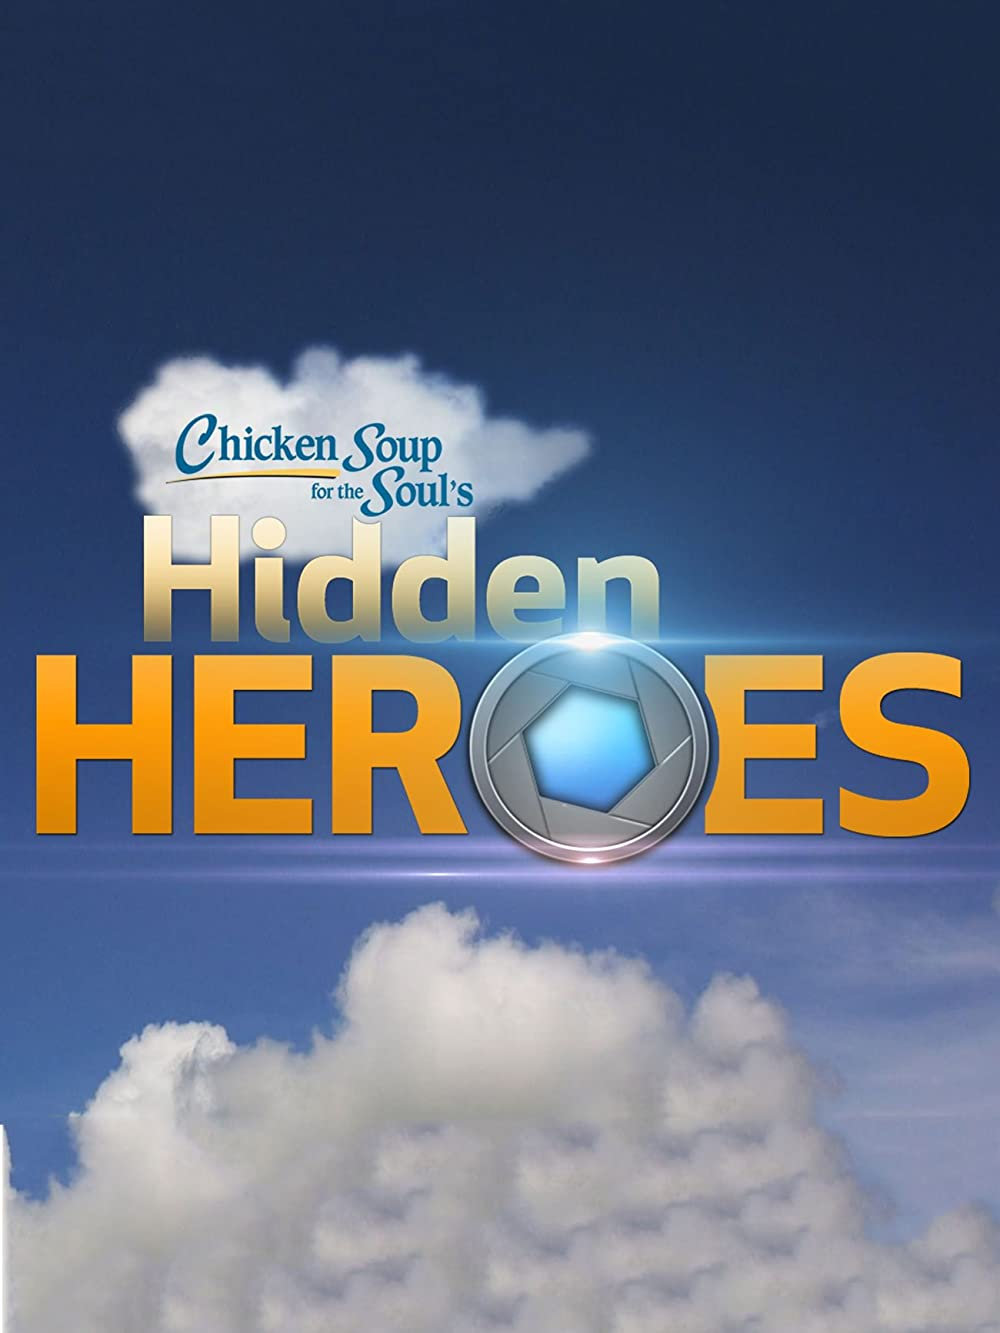 Chicken Soup for the Soul’s Hidden Heroes